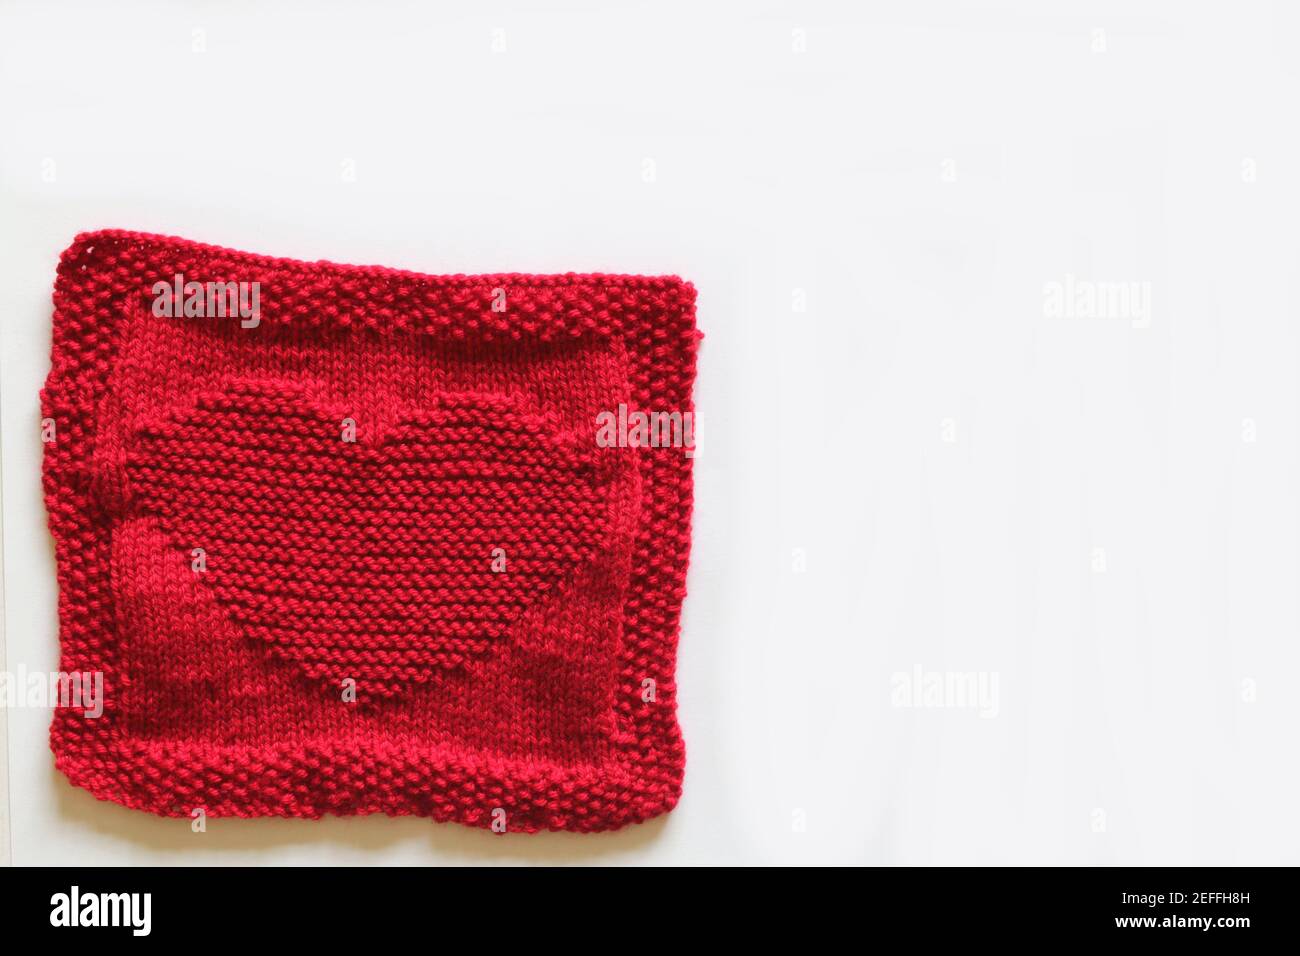 Red knitted square with a heart motif Stock Photo